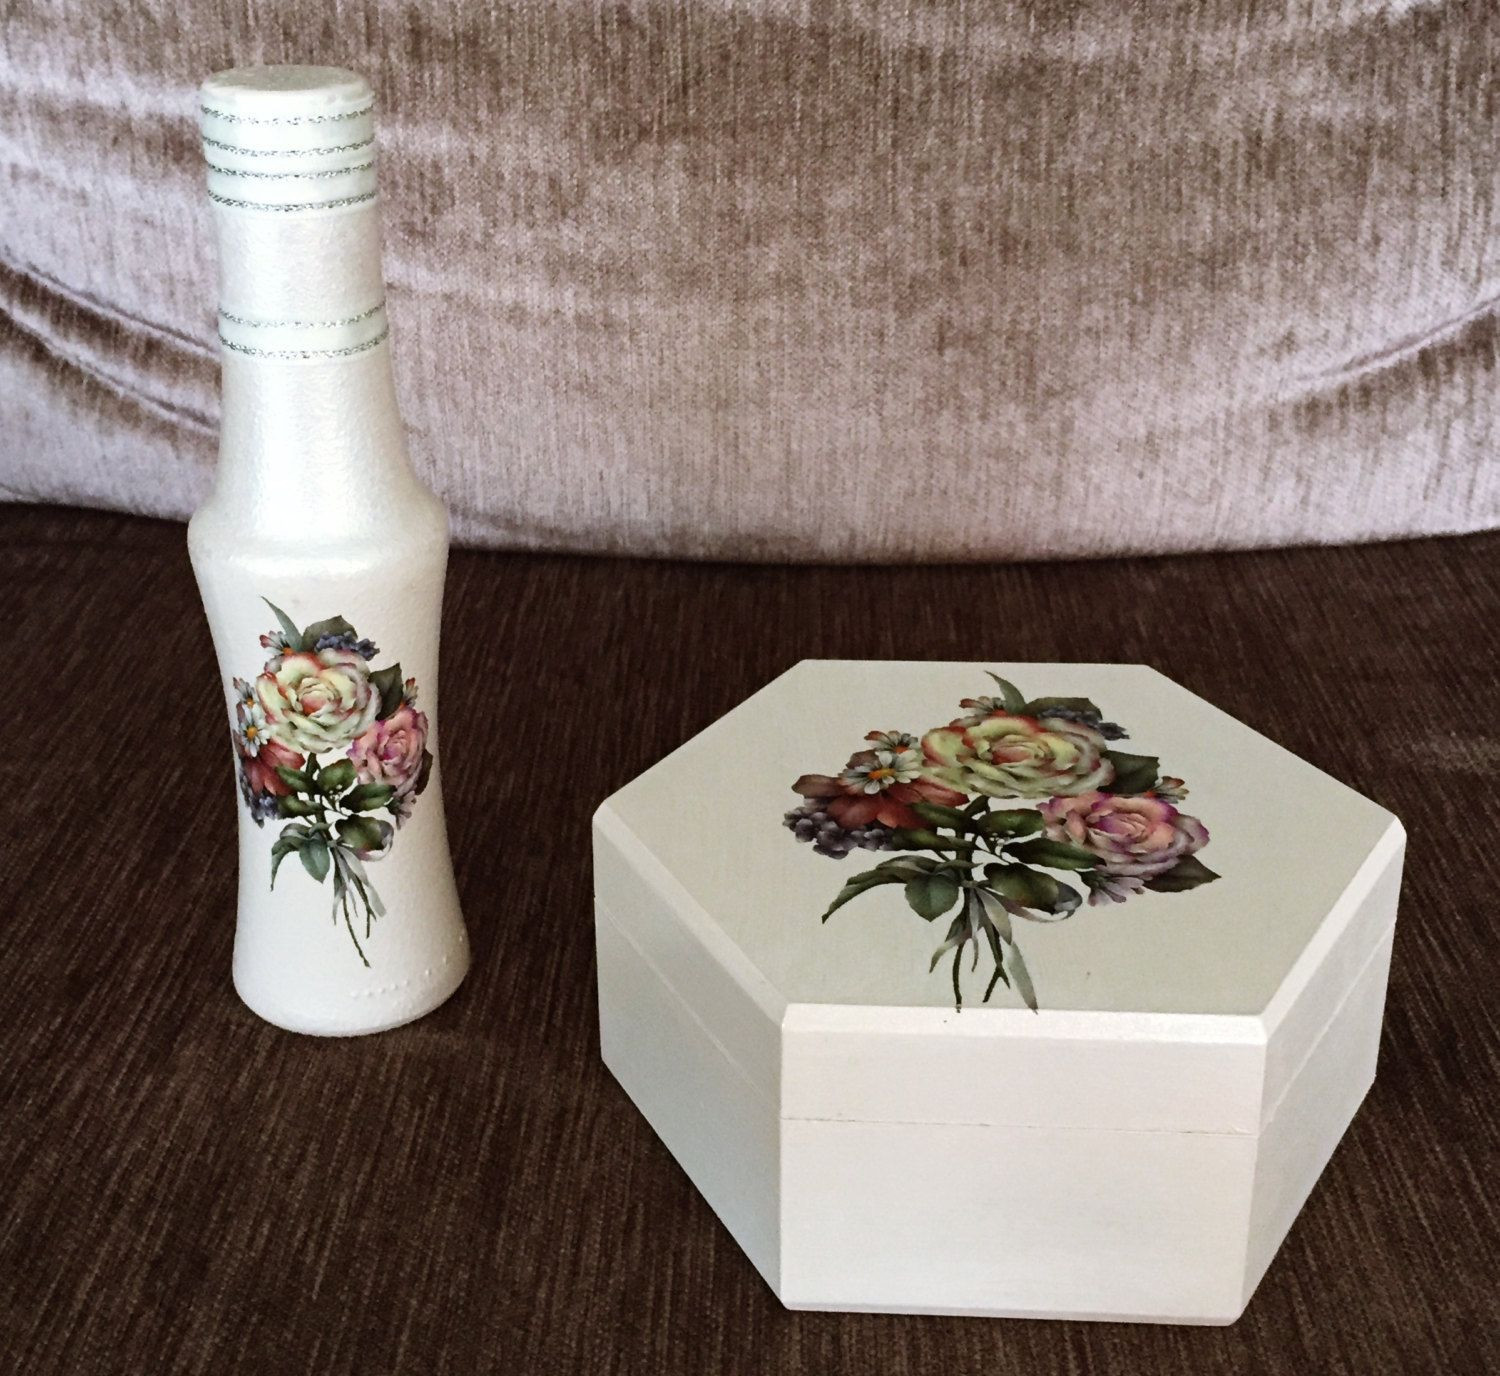 21 Stylish Flower Vase Stencil 2024 free download flower vase stencil of decorative bottle and wooden box home decor two pieces set by for decorative bottle and wooden box home decor two pieces set by sdydesign on etsy